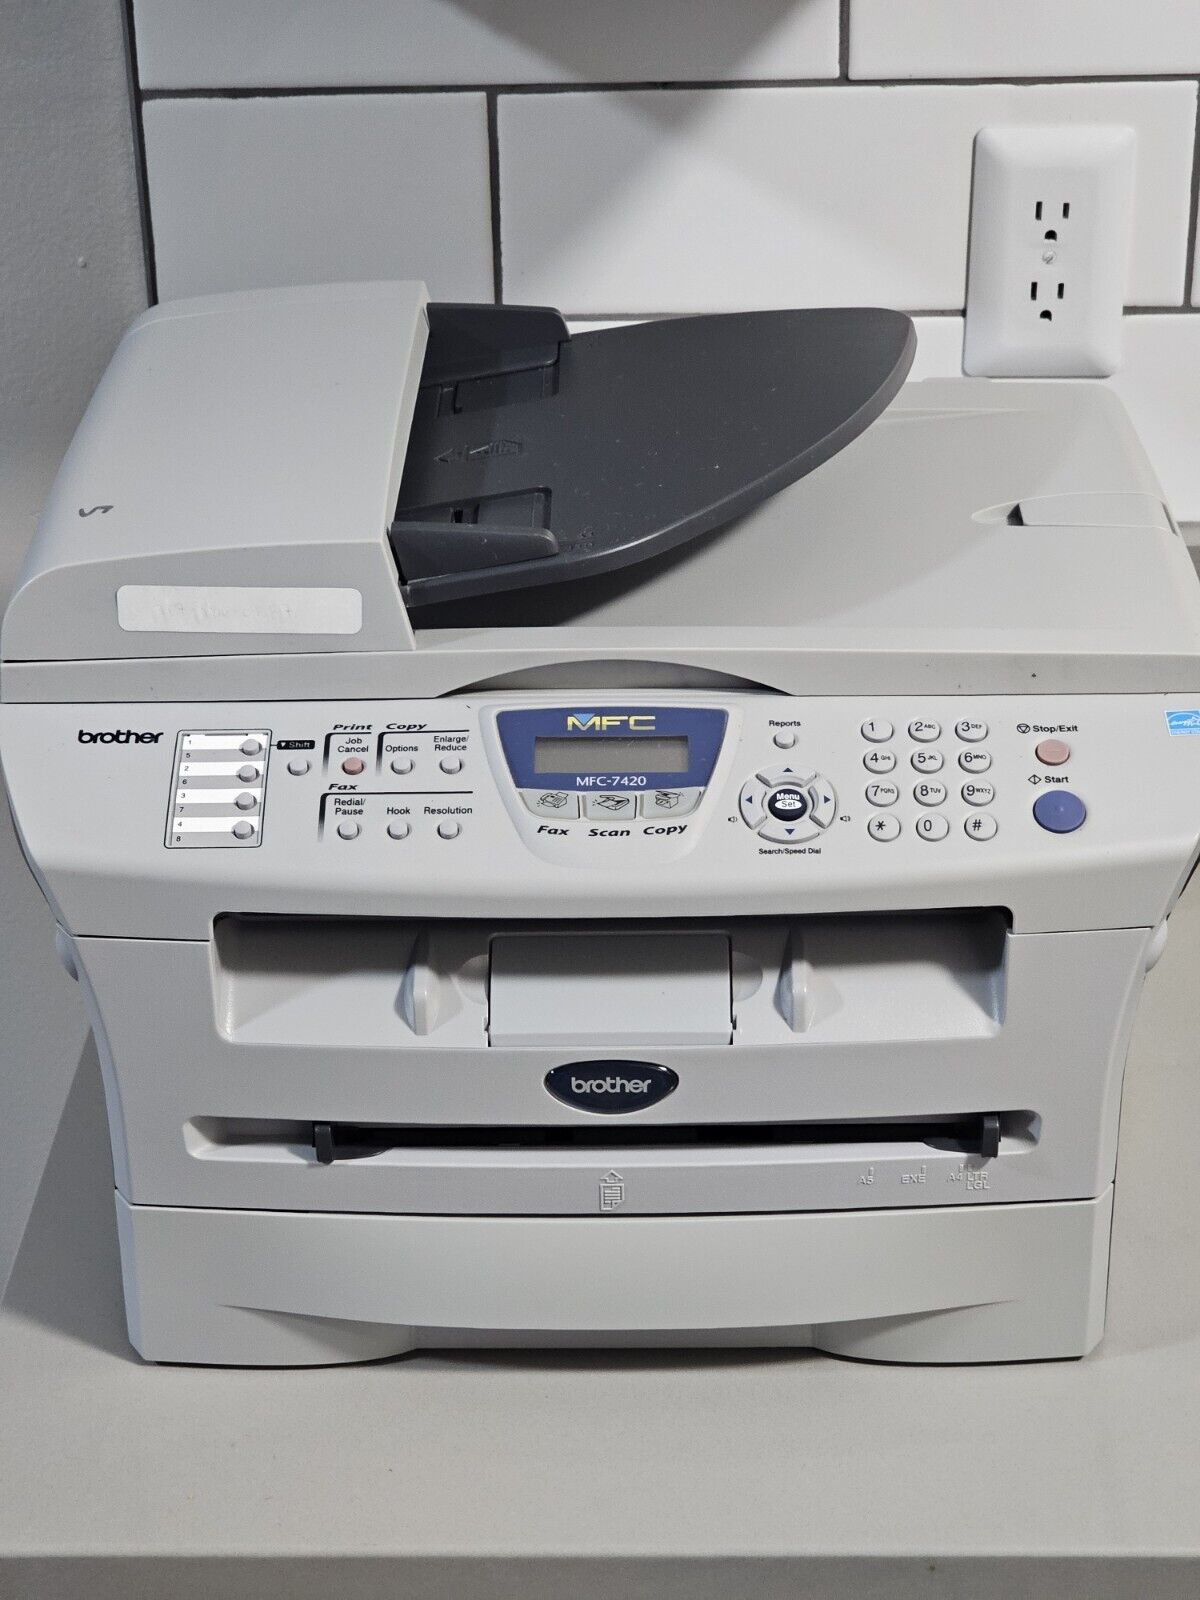 Brother MFC-7420 All-In-One Laser B&W Printer A1 FULLY TESTED Page Count 5414